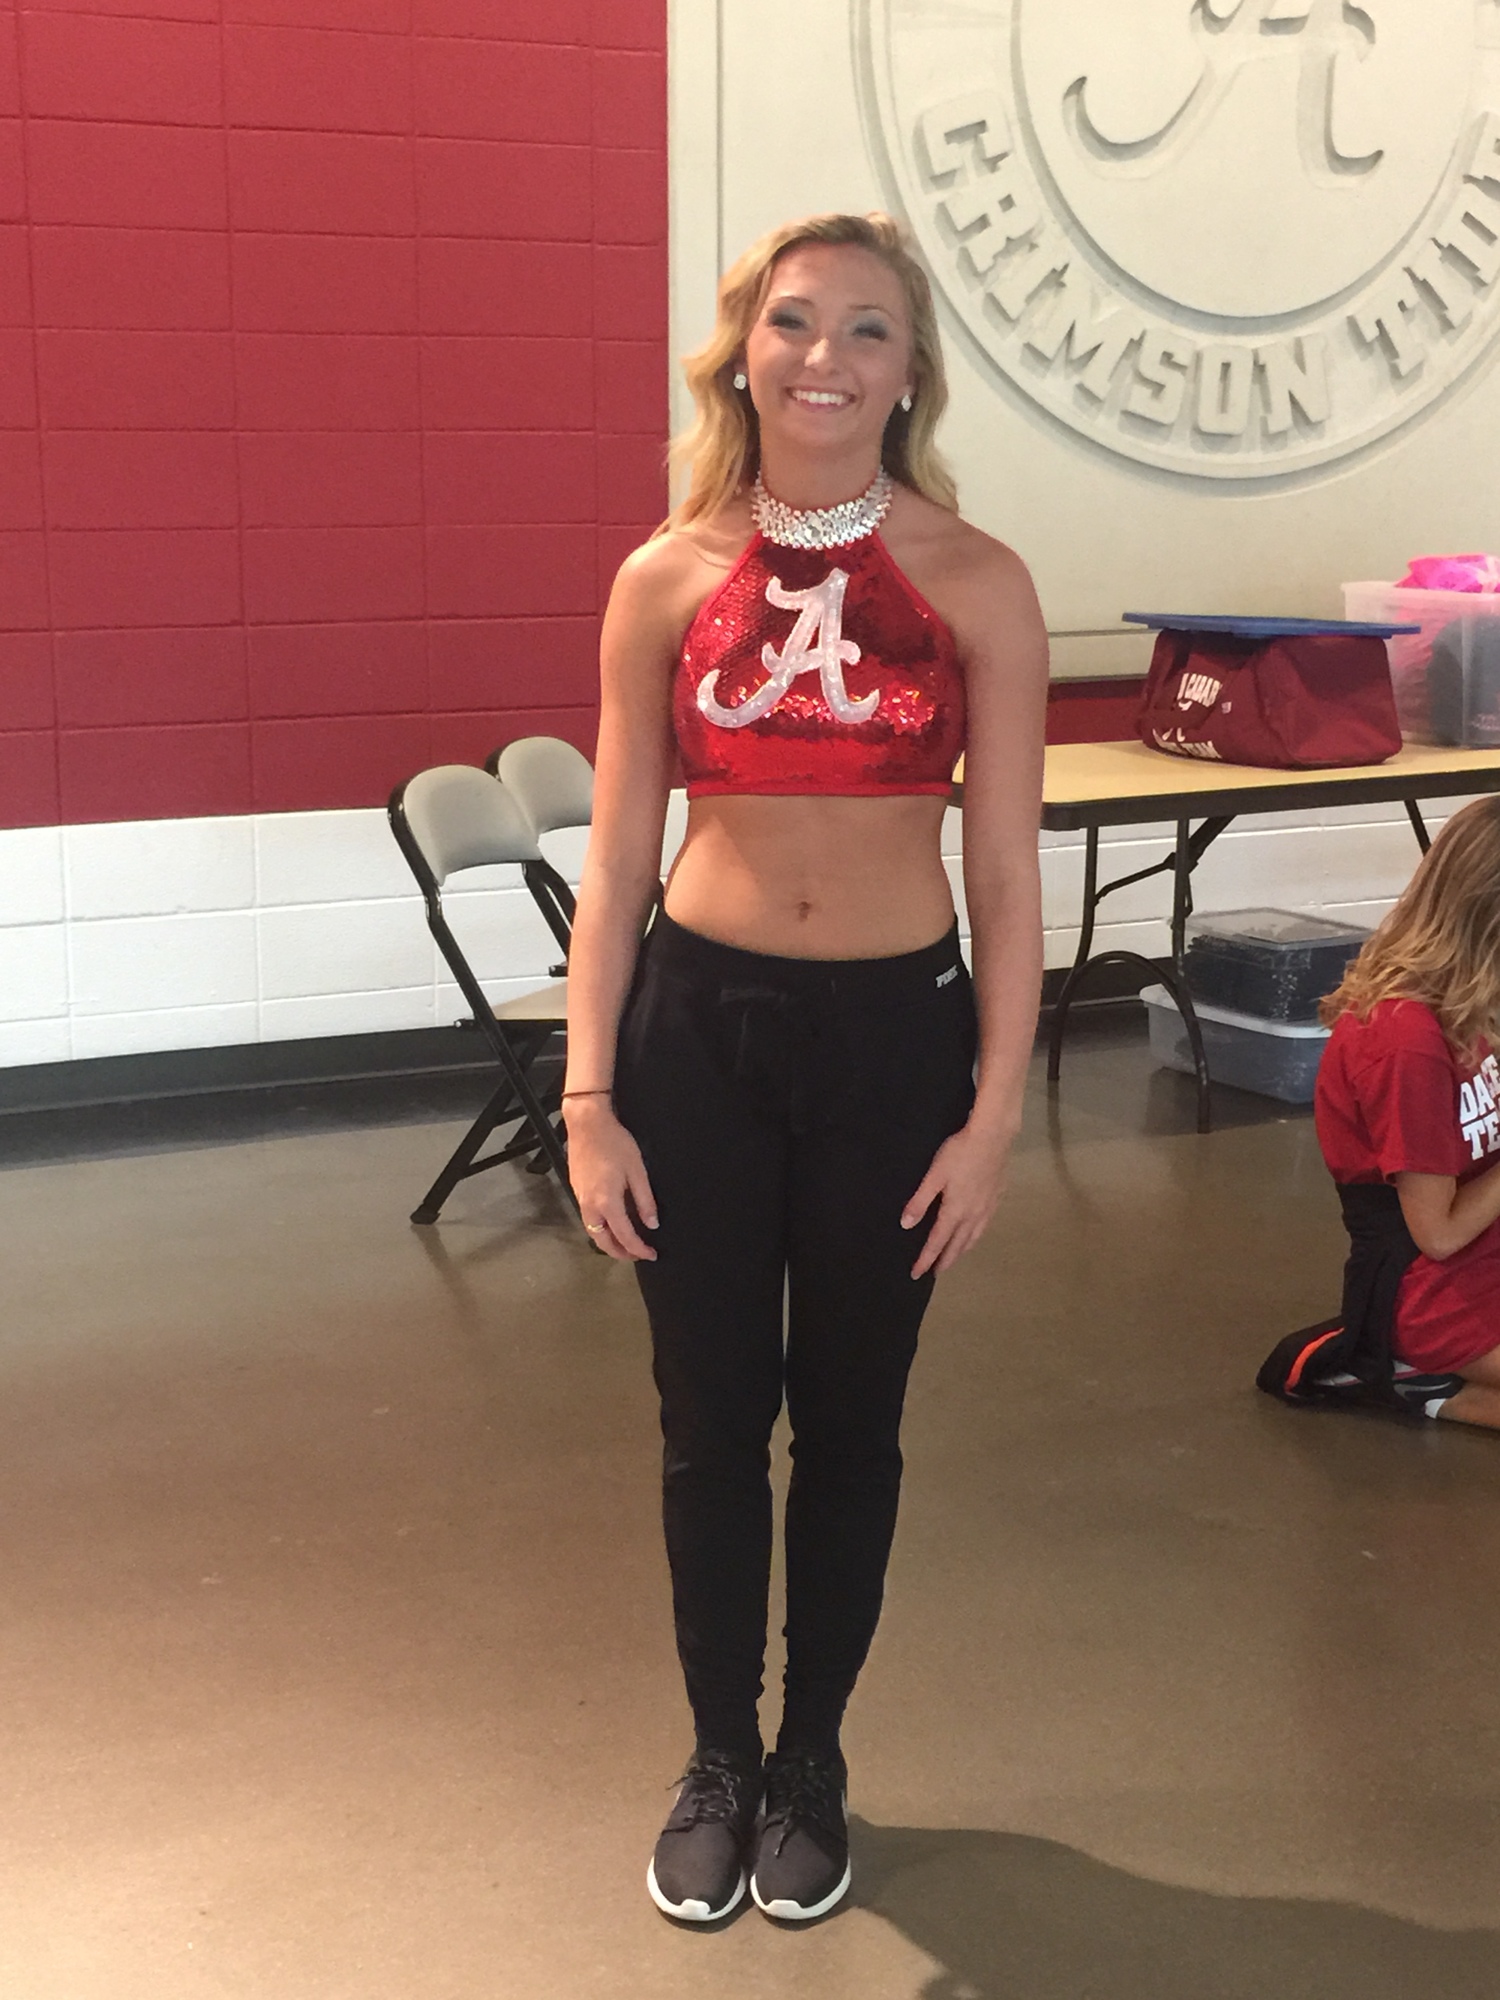 After earning a spot on the Crimson Cabaret dance team, Alexsa Dietrich shows off her new university colors.